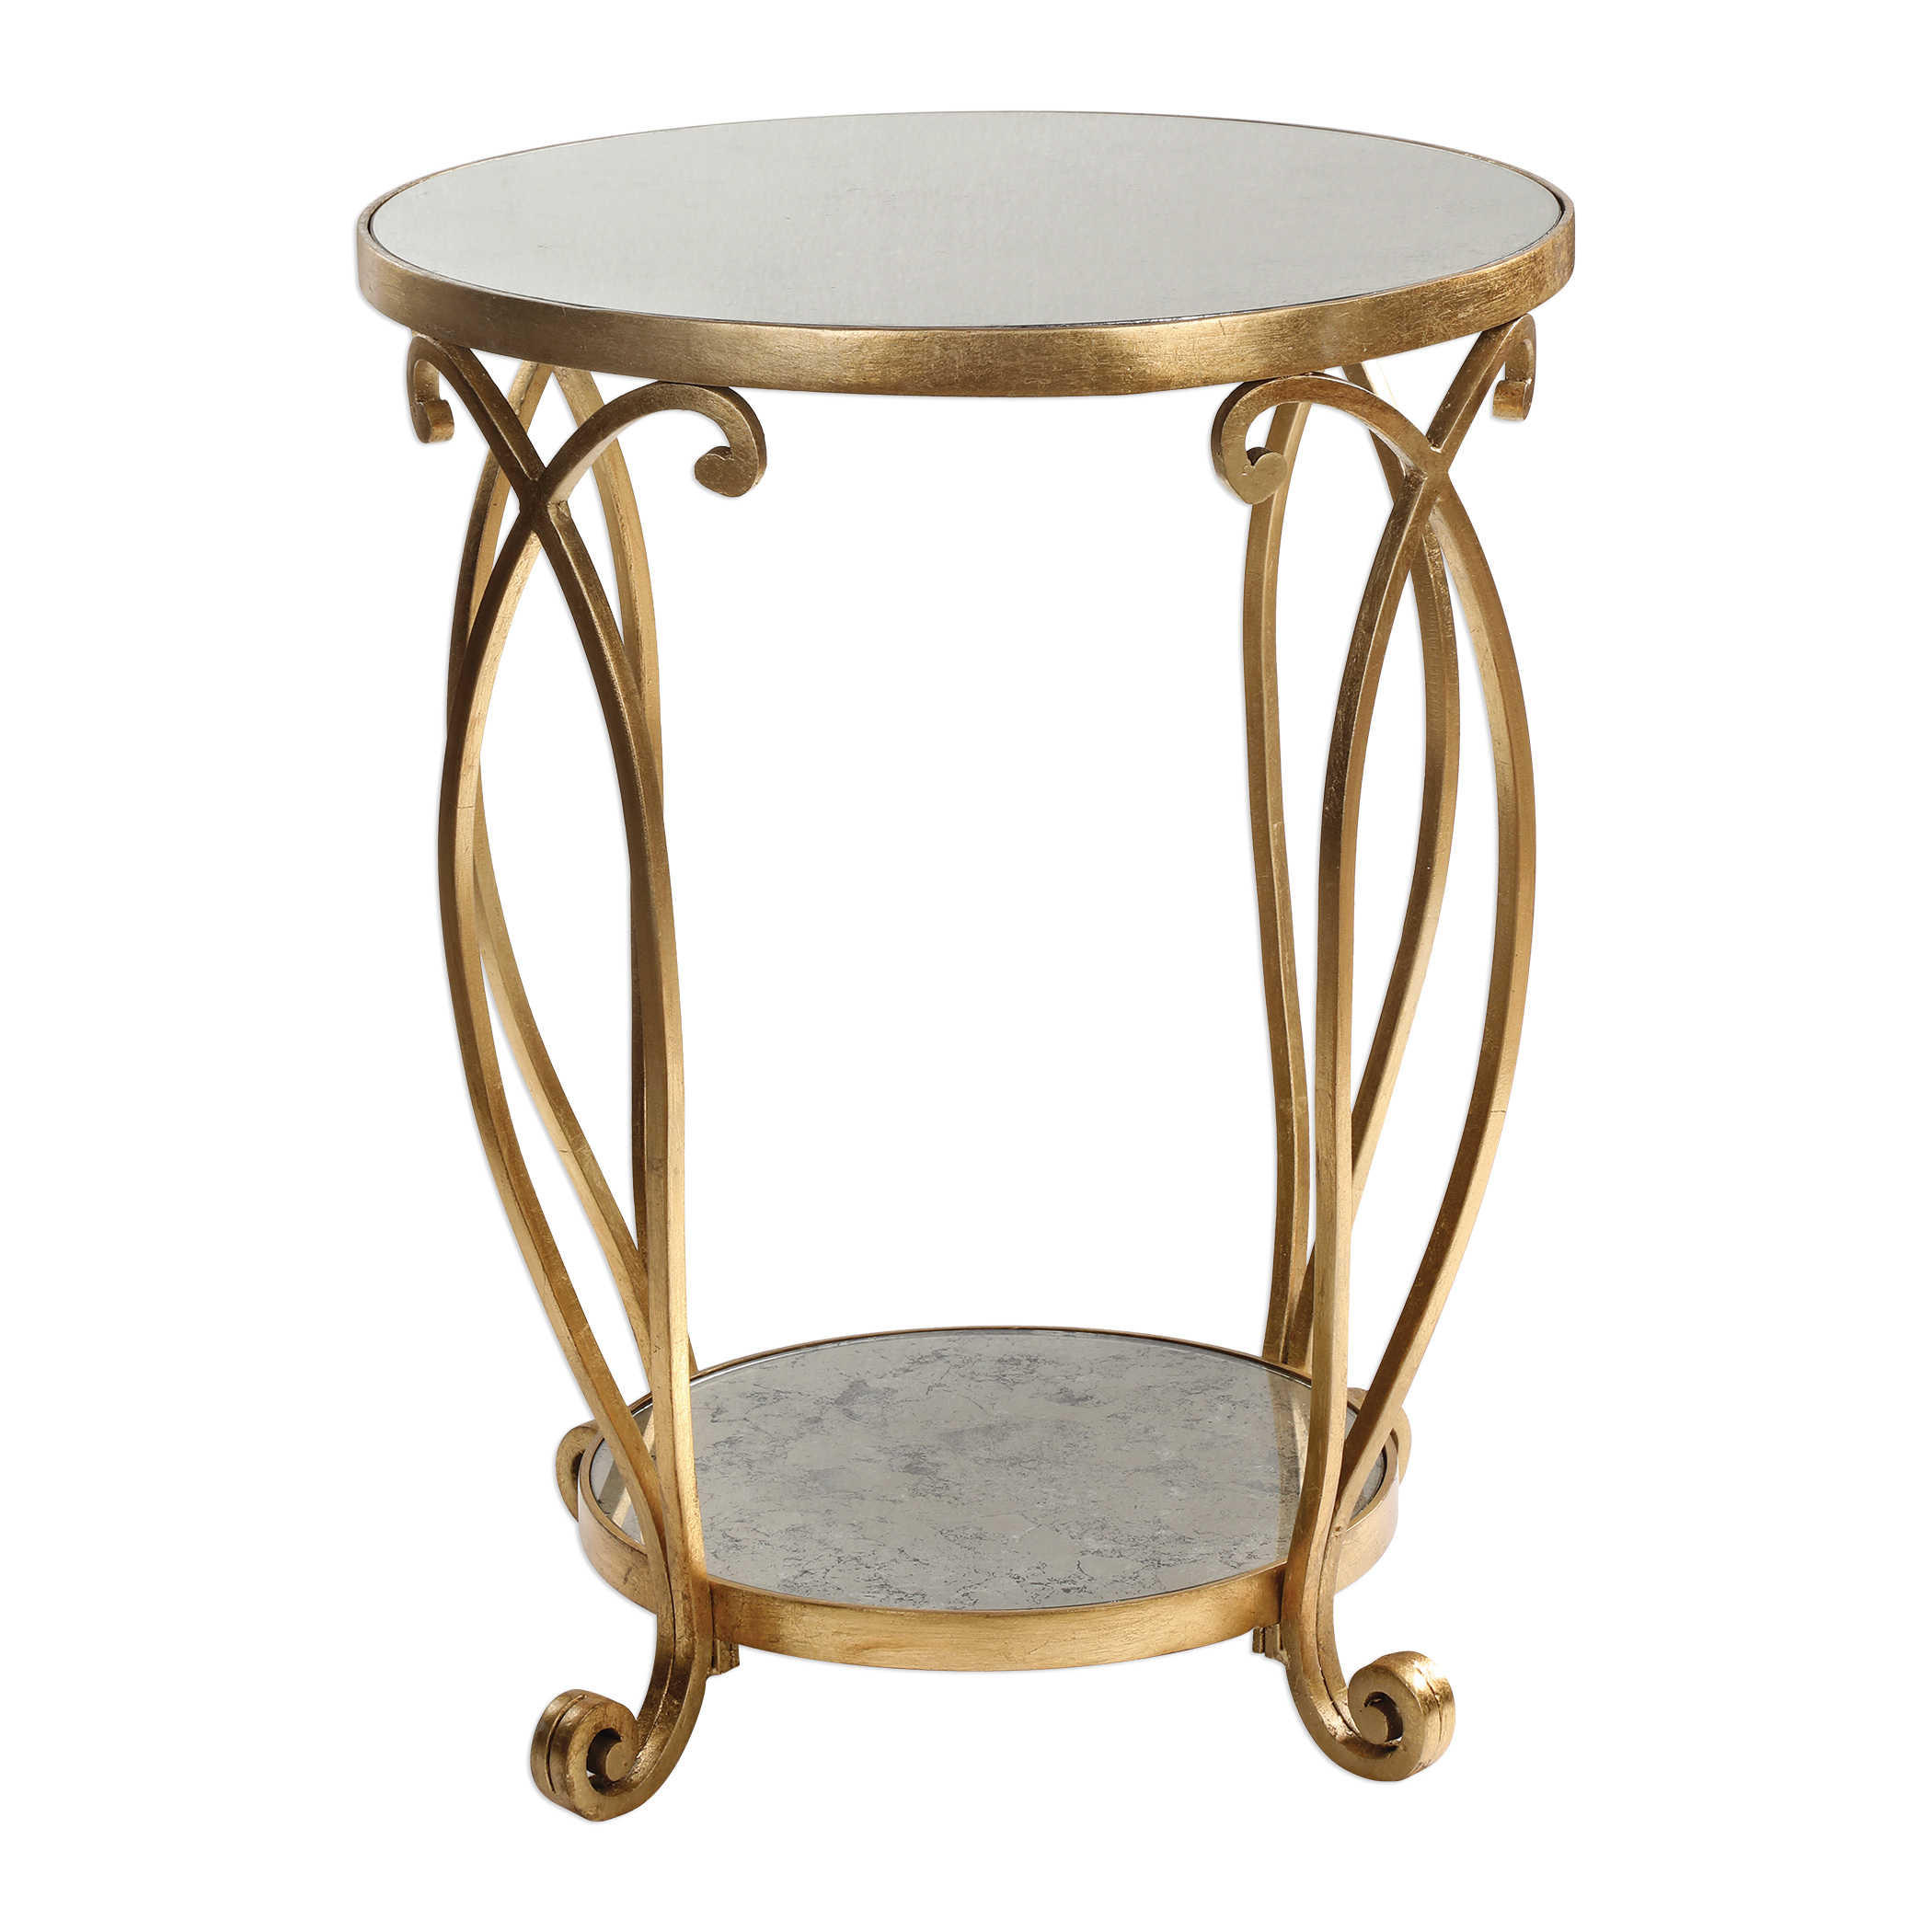 uttermost martella round gold accent table french chairs broyhill side with usb laton mirrored kohls floor lamps bamboo nesting tables brass the brick coffee wicker chair very